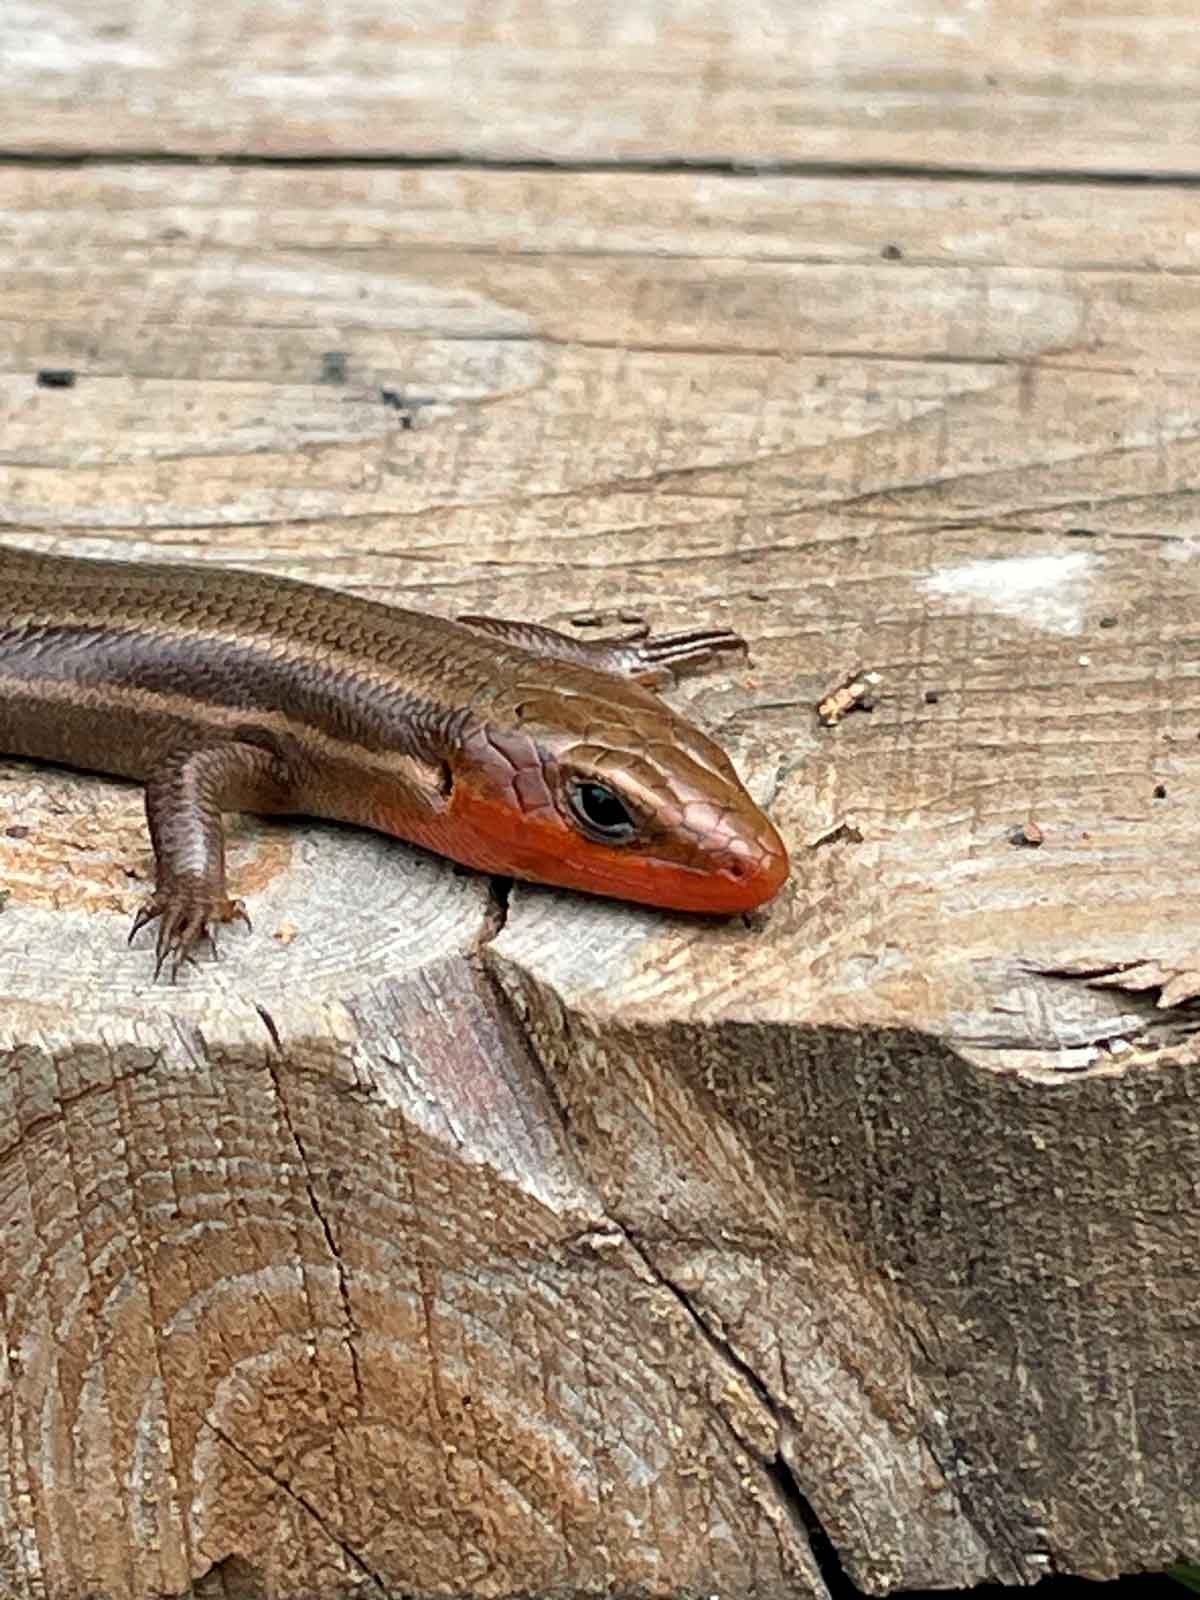 A 5-lined skink during mating season.